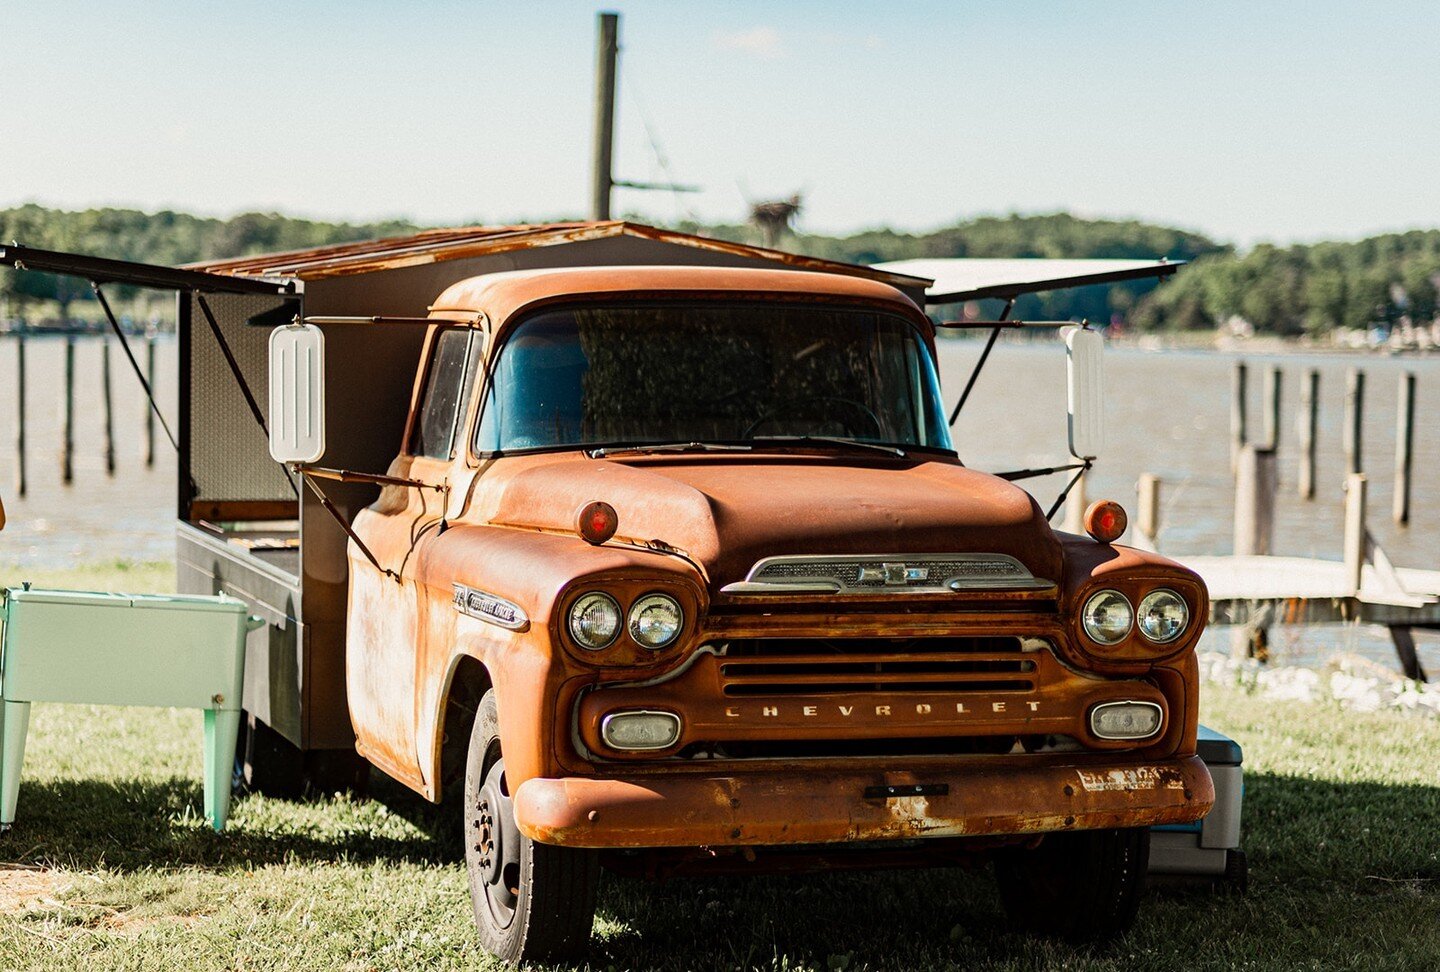 L👀king for something classic, yet timeless to add a special touch to your next event? ✨Say hello again to Mac, our unique Chevrolet Tap Truck that's sure to make a statement! With it&rsquo;s timeless design, Mac is the perfect blend of old-school ch